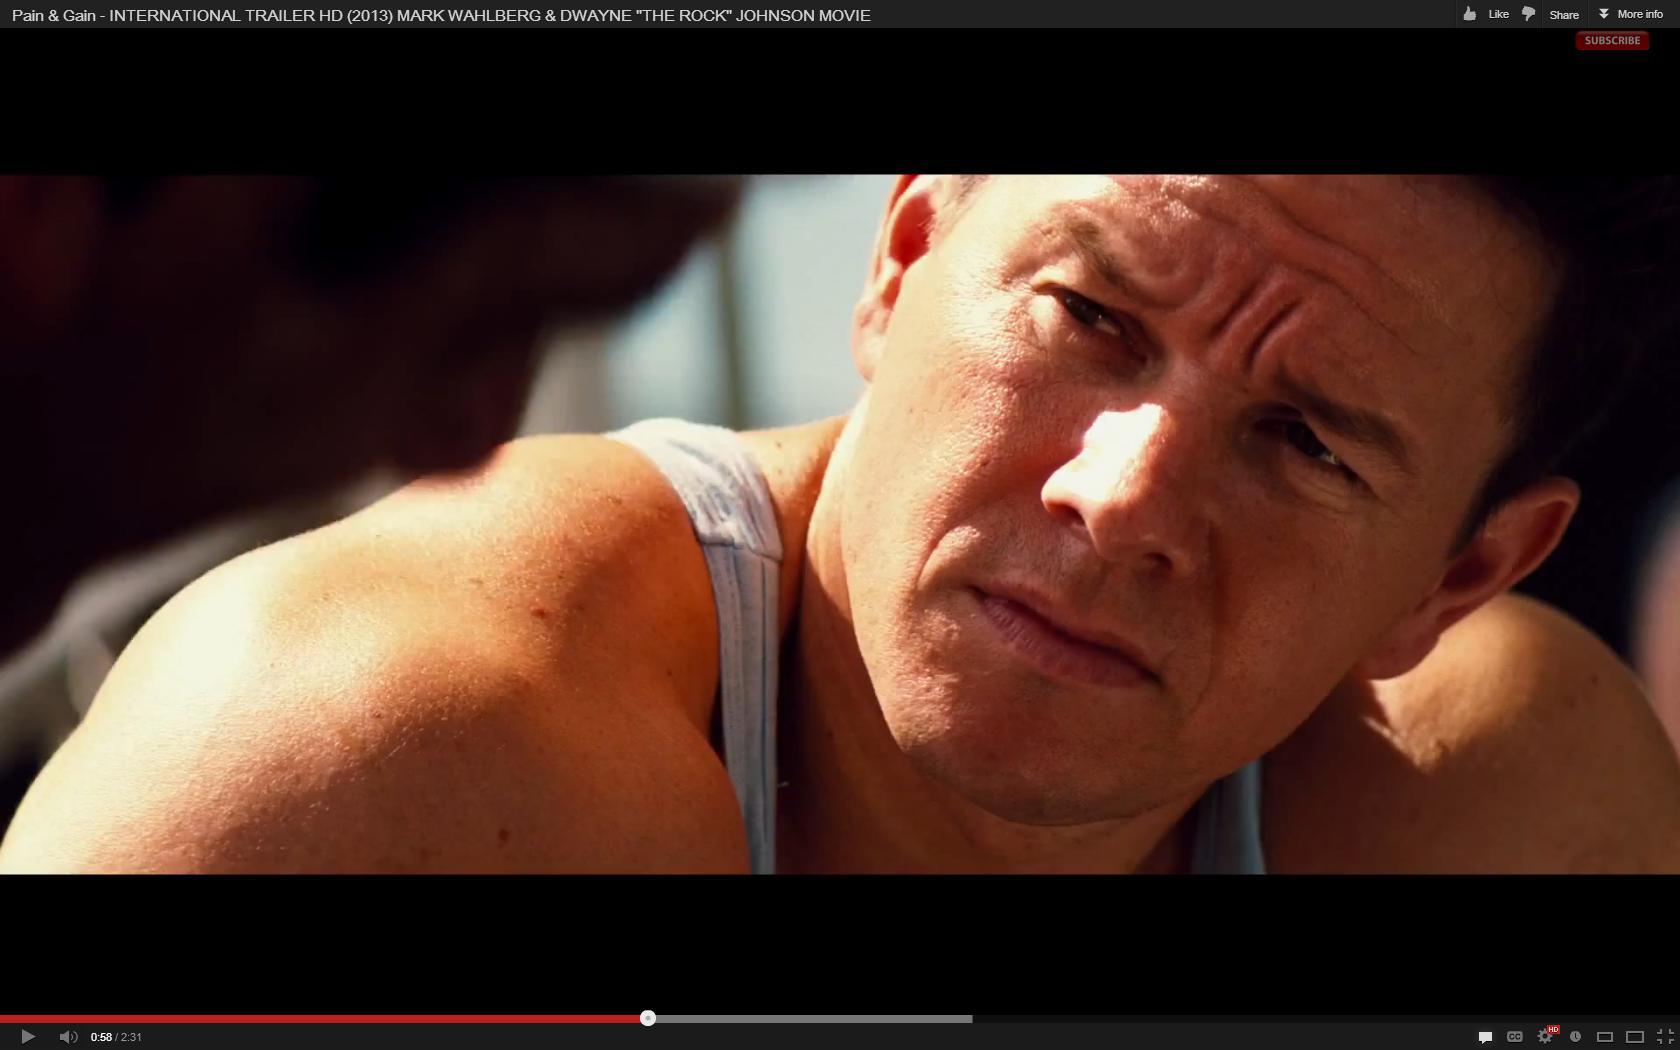 christopher langstaff pain and gain torrent